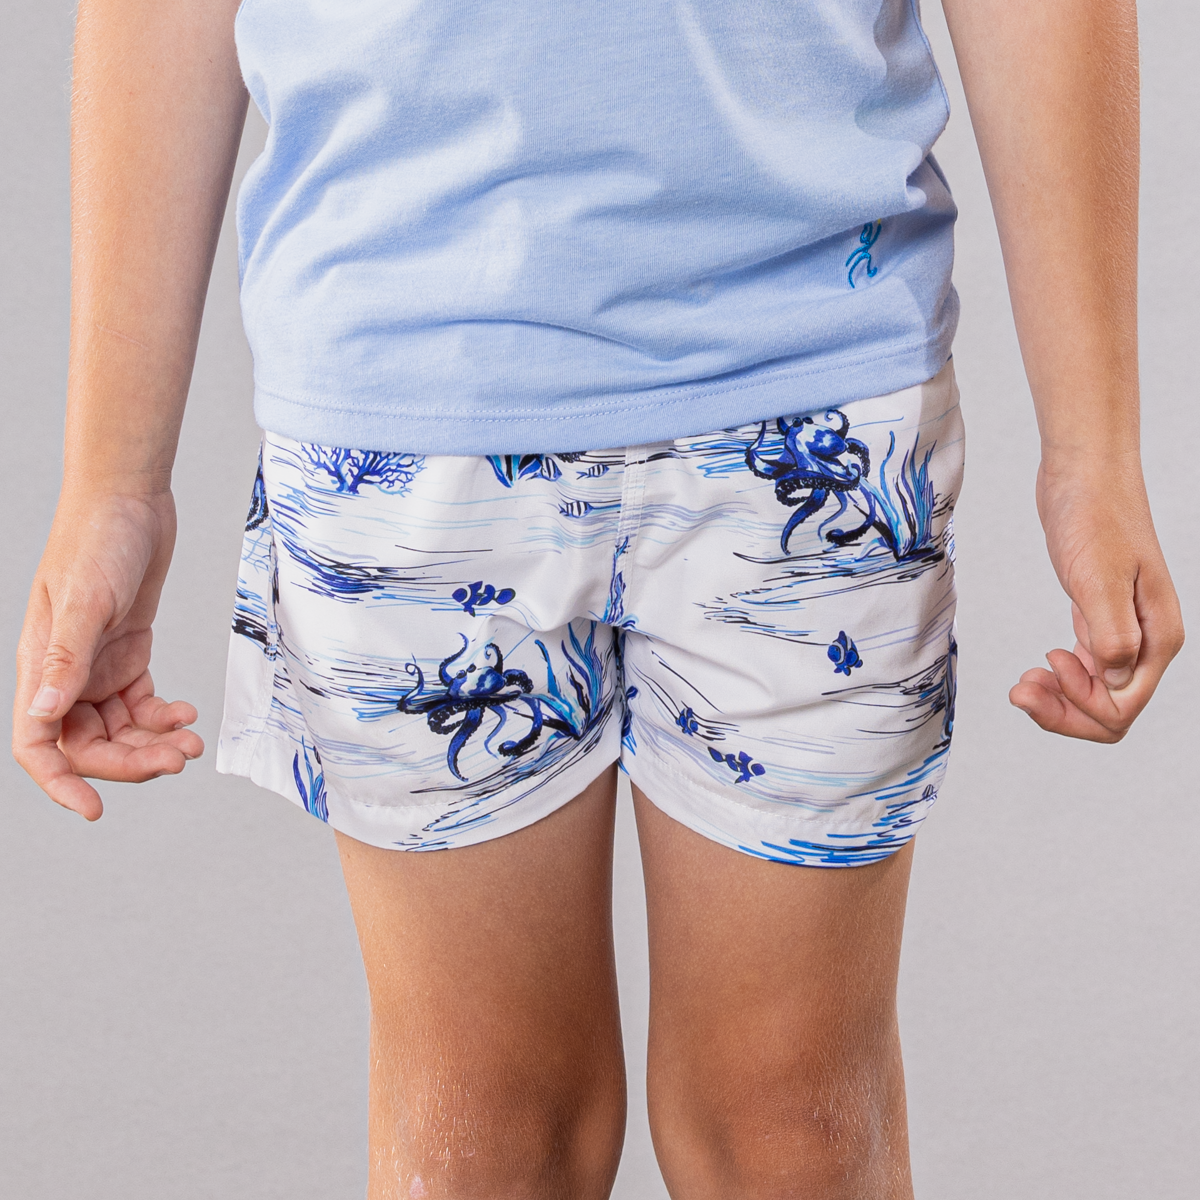 White swim trunks with octopi pattern for boys, front view